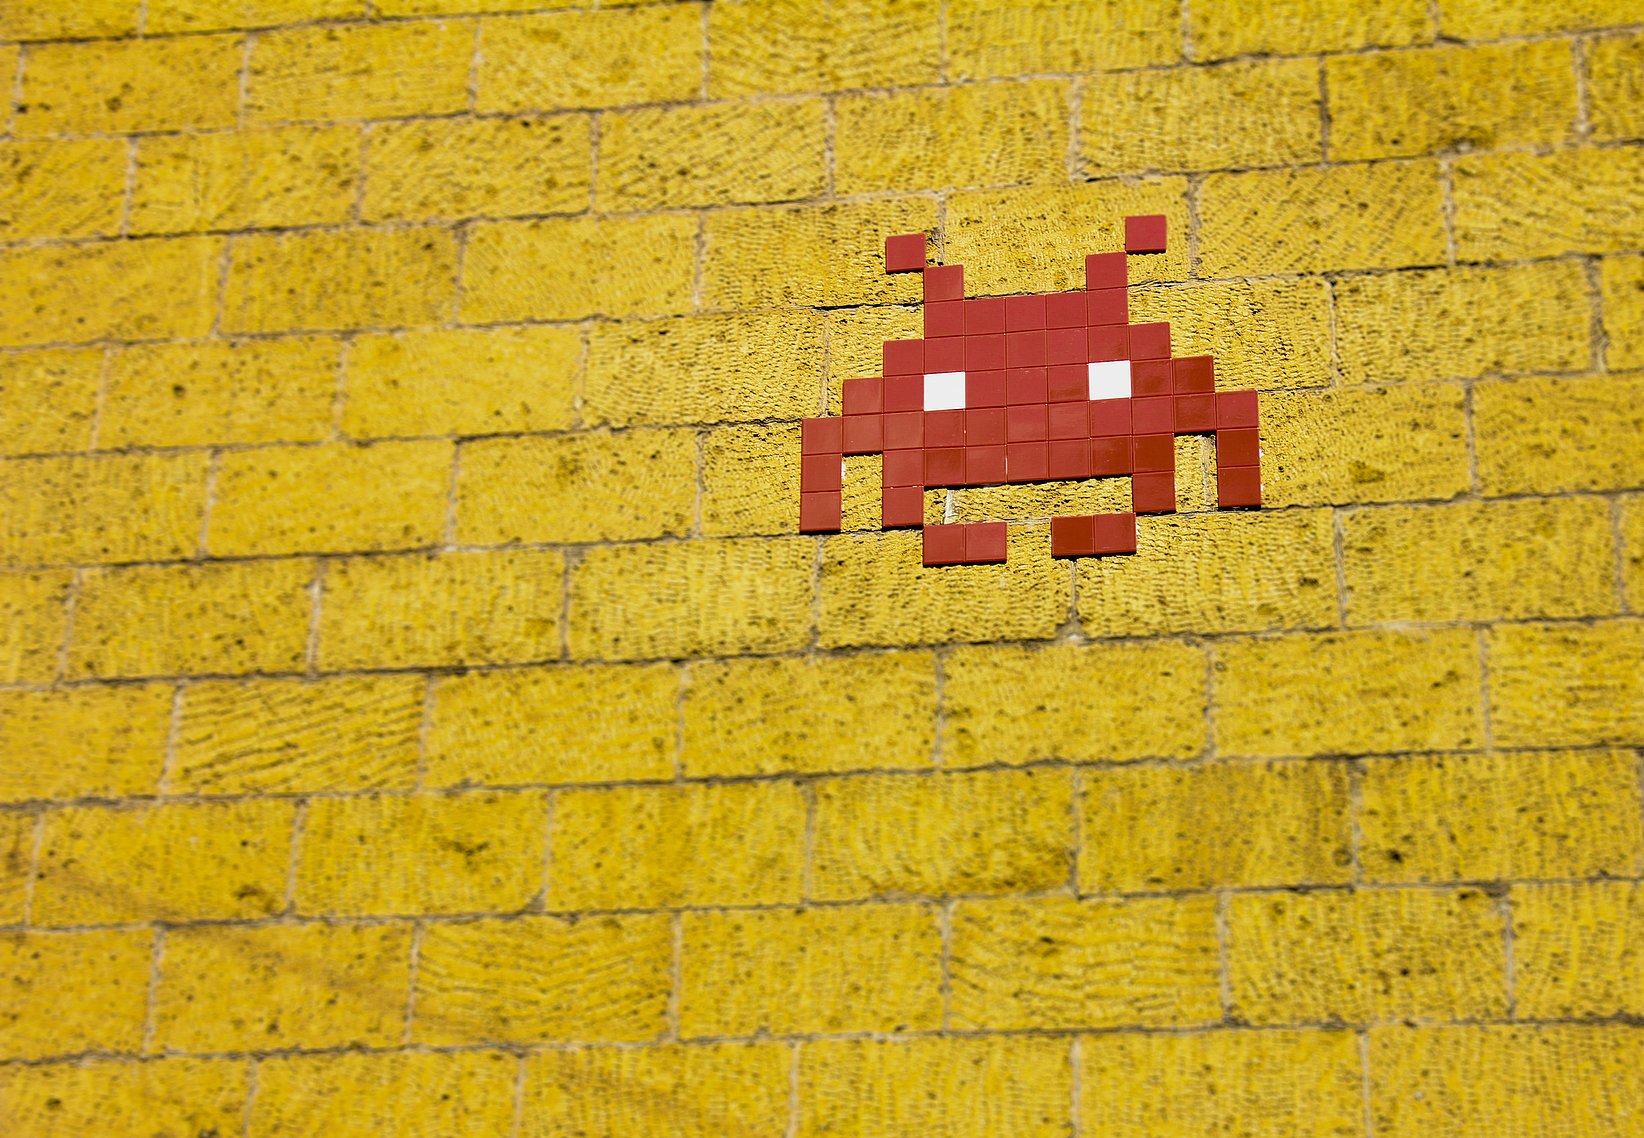 A red pixel figure on a yellow background, which reminds the viewer of the nostalgia of games.